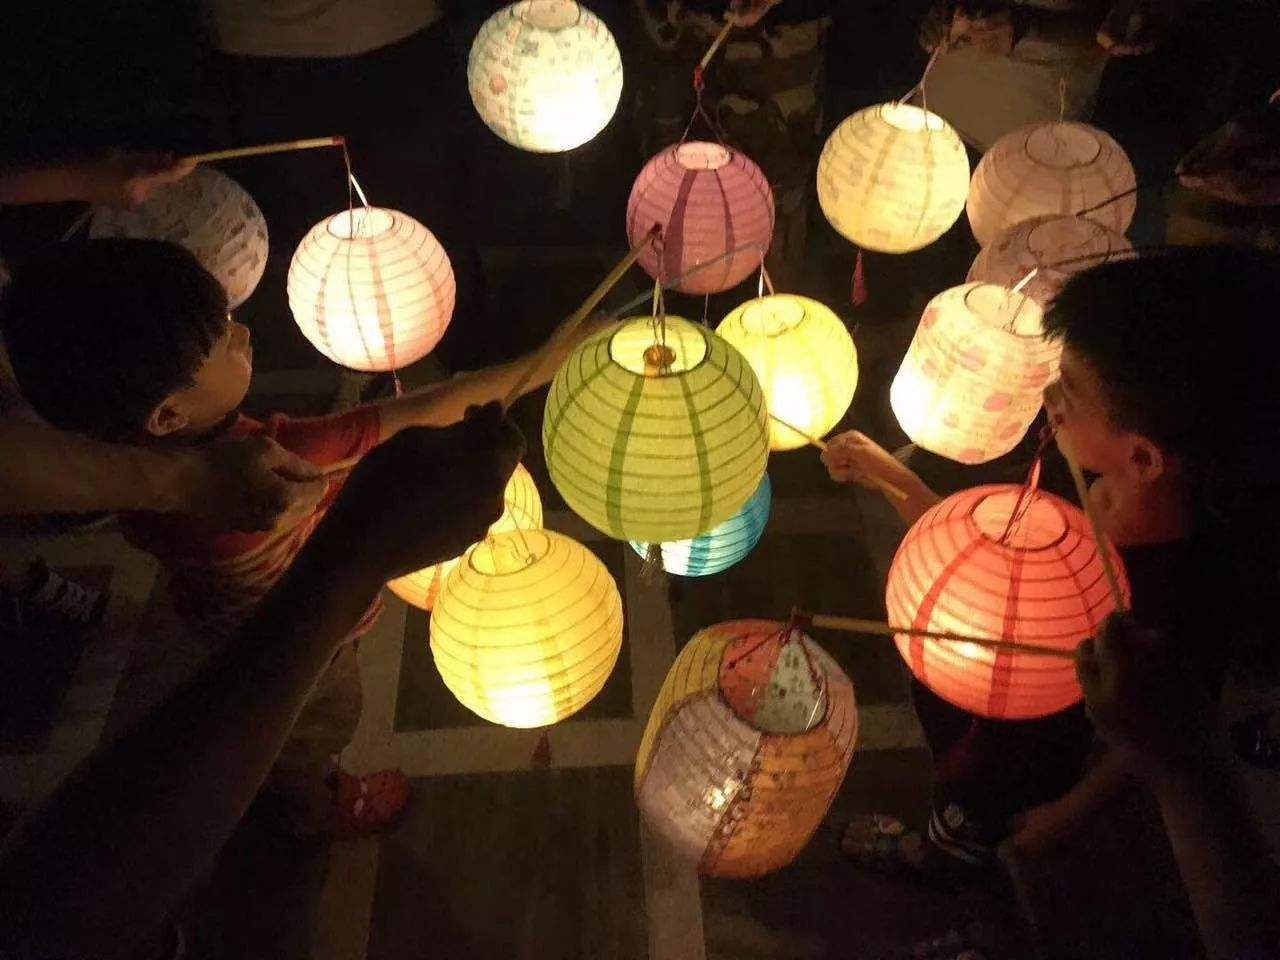 Play with lanterns